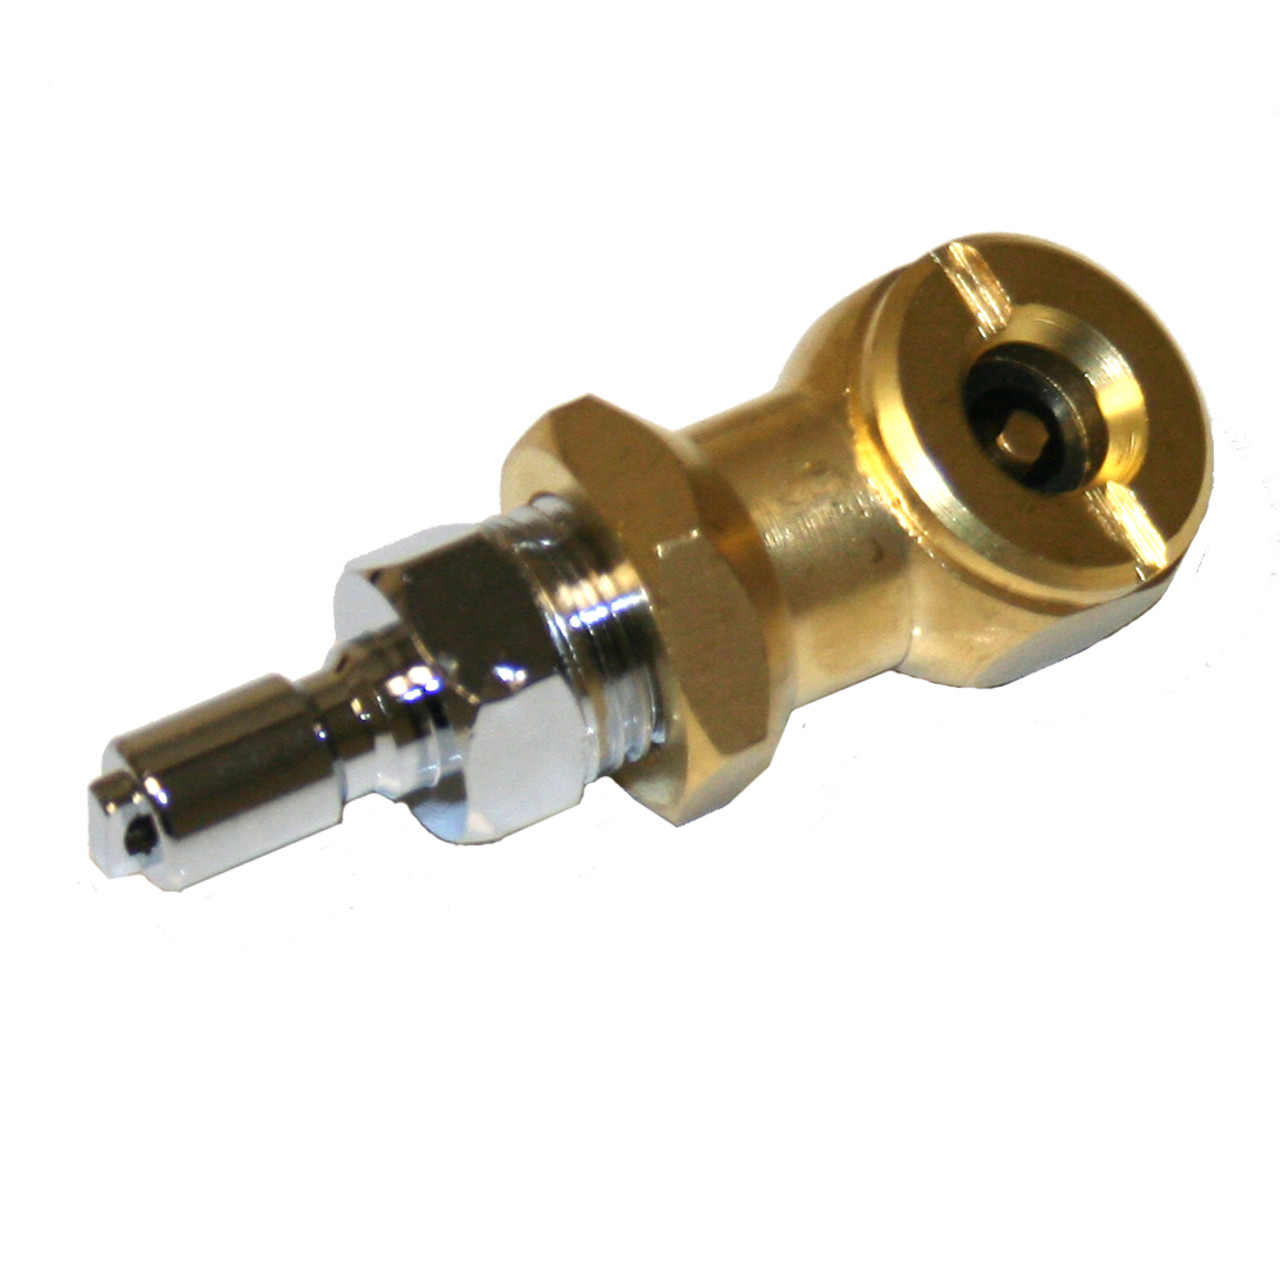 Brass Air Tire Inflator with Standard 1/4inch NPT Adapter